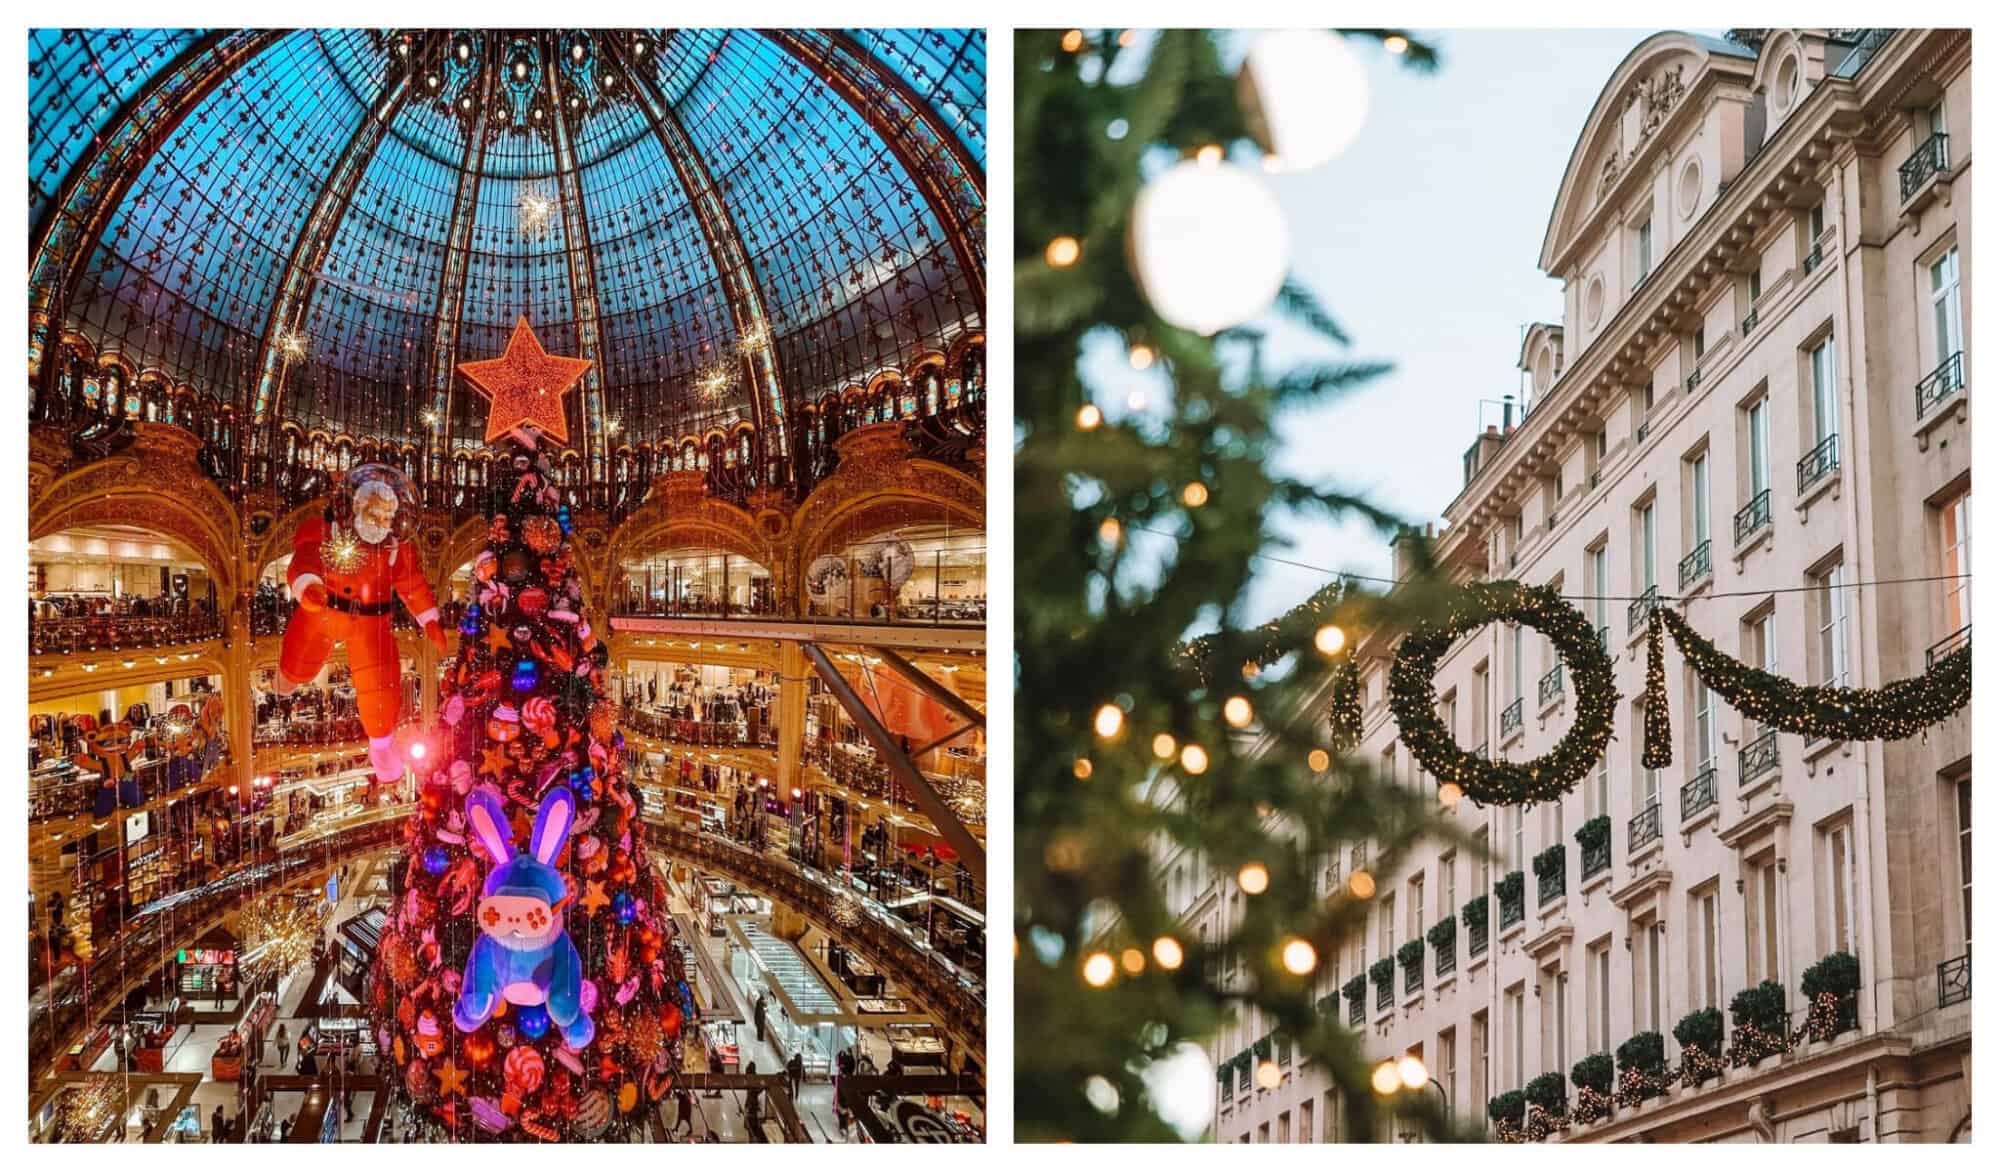 Left: Santa Claus and more Christmas decorations inside Galeries Lafayette in Paris; Right: Advent wreaths hanging in Parisian streets for Christmas.